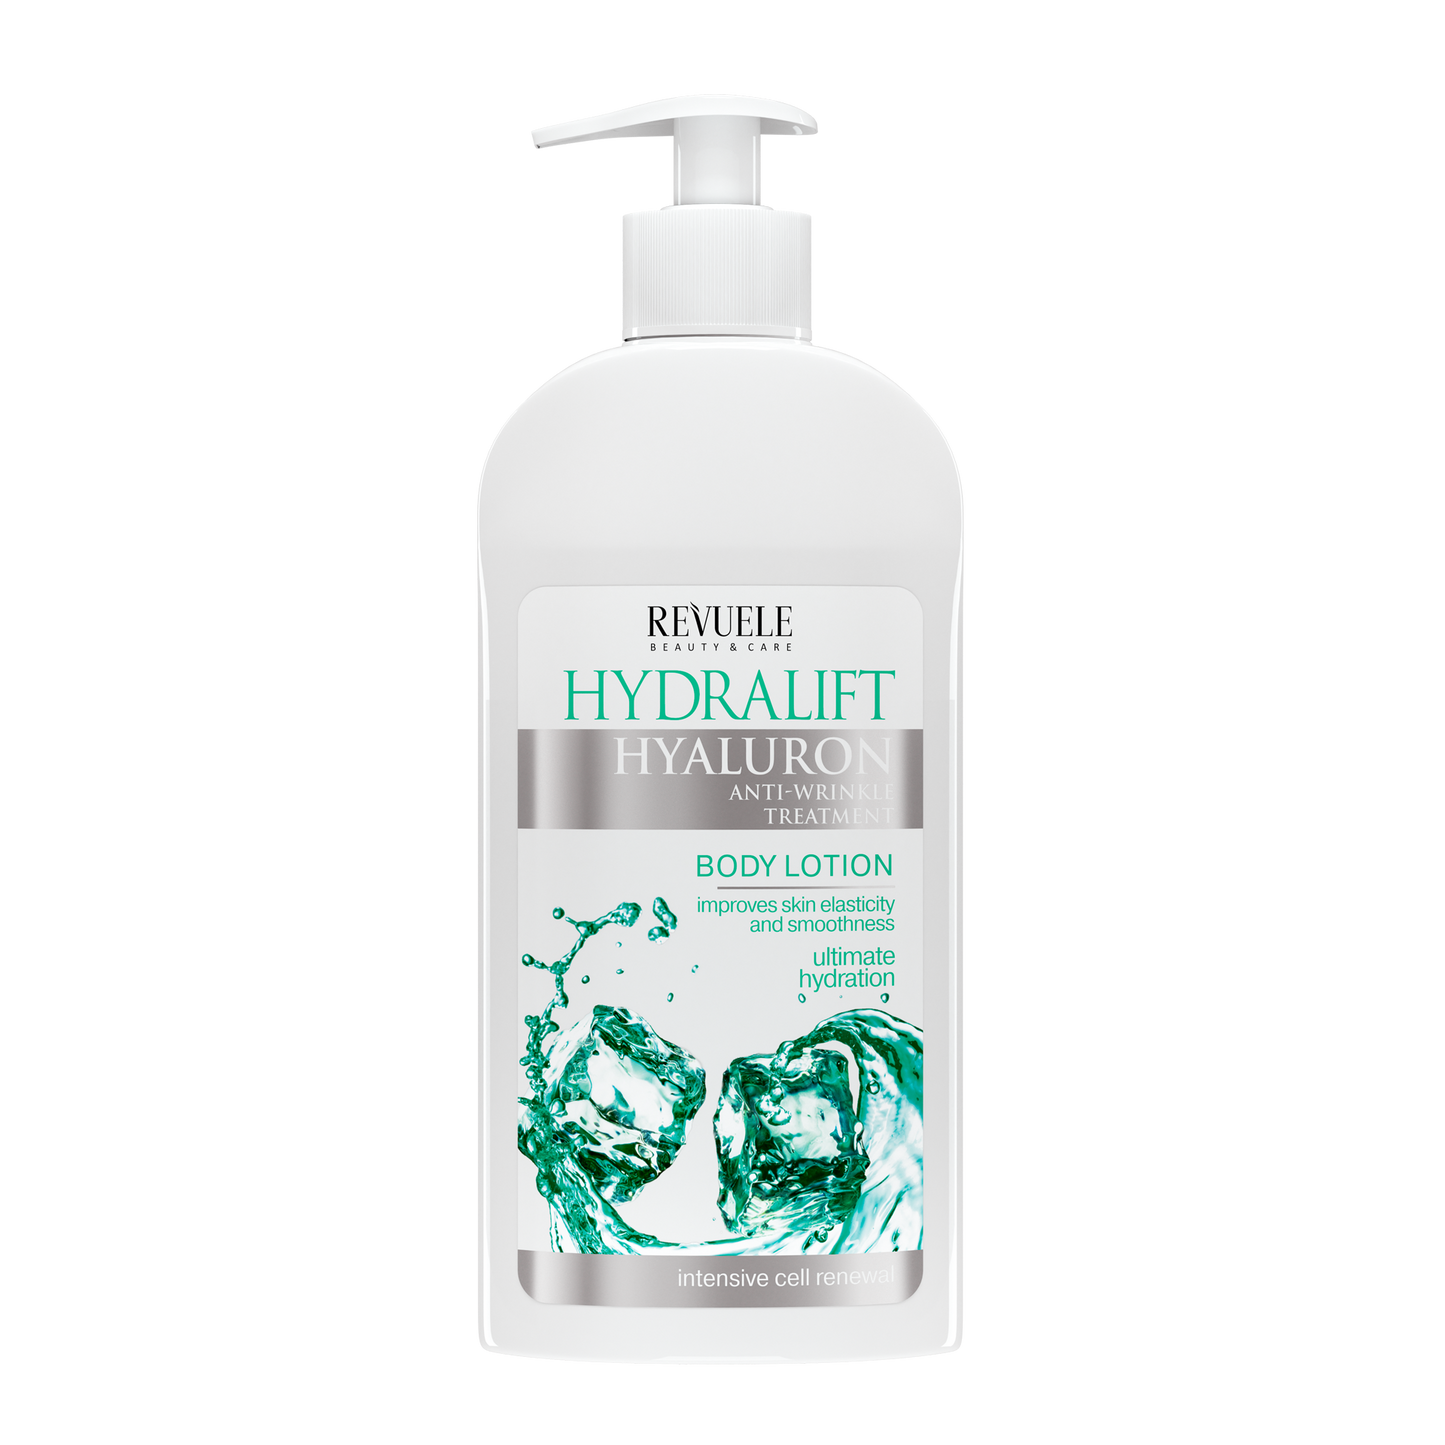 REVUELE HYDRALIFT HYALURON Moisturizing Body Lotion with Hyaluronic Acid-400ml